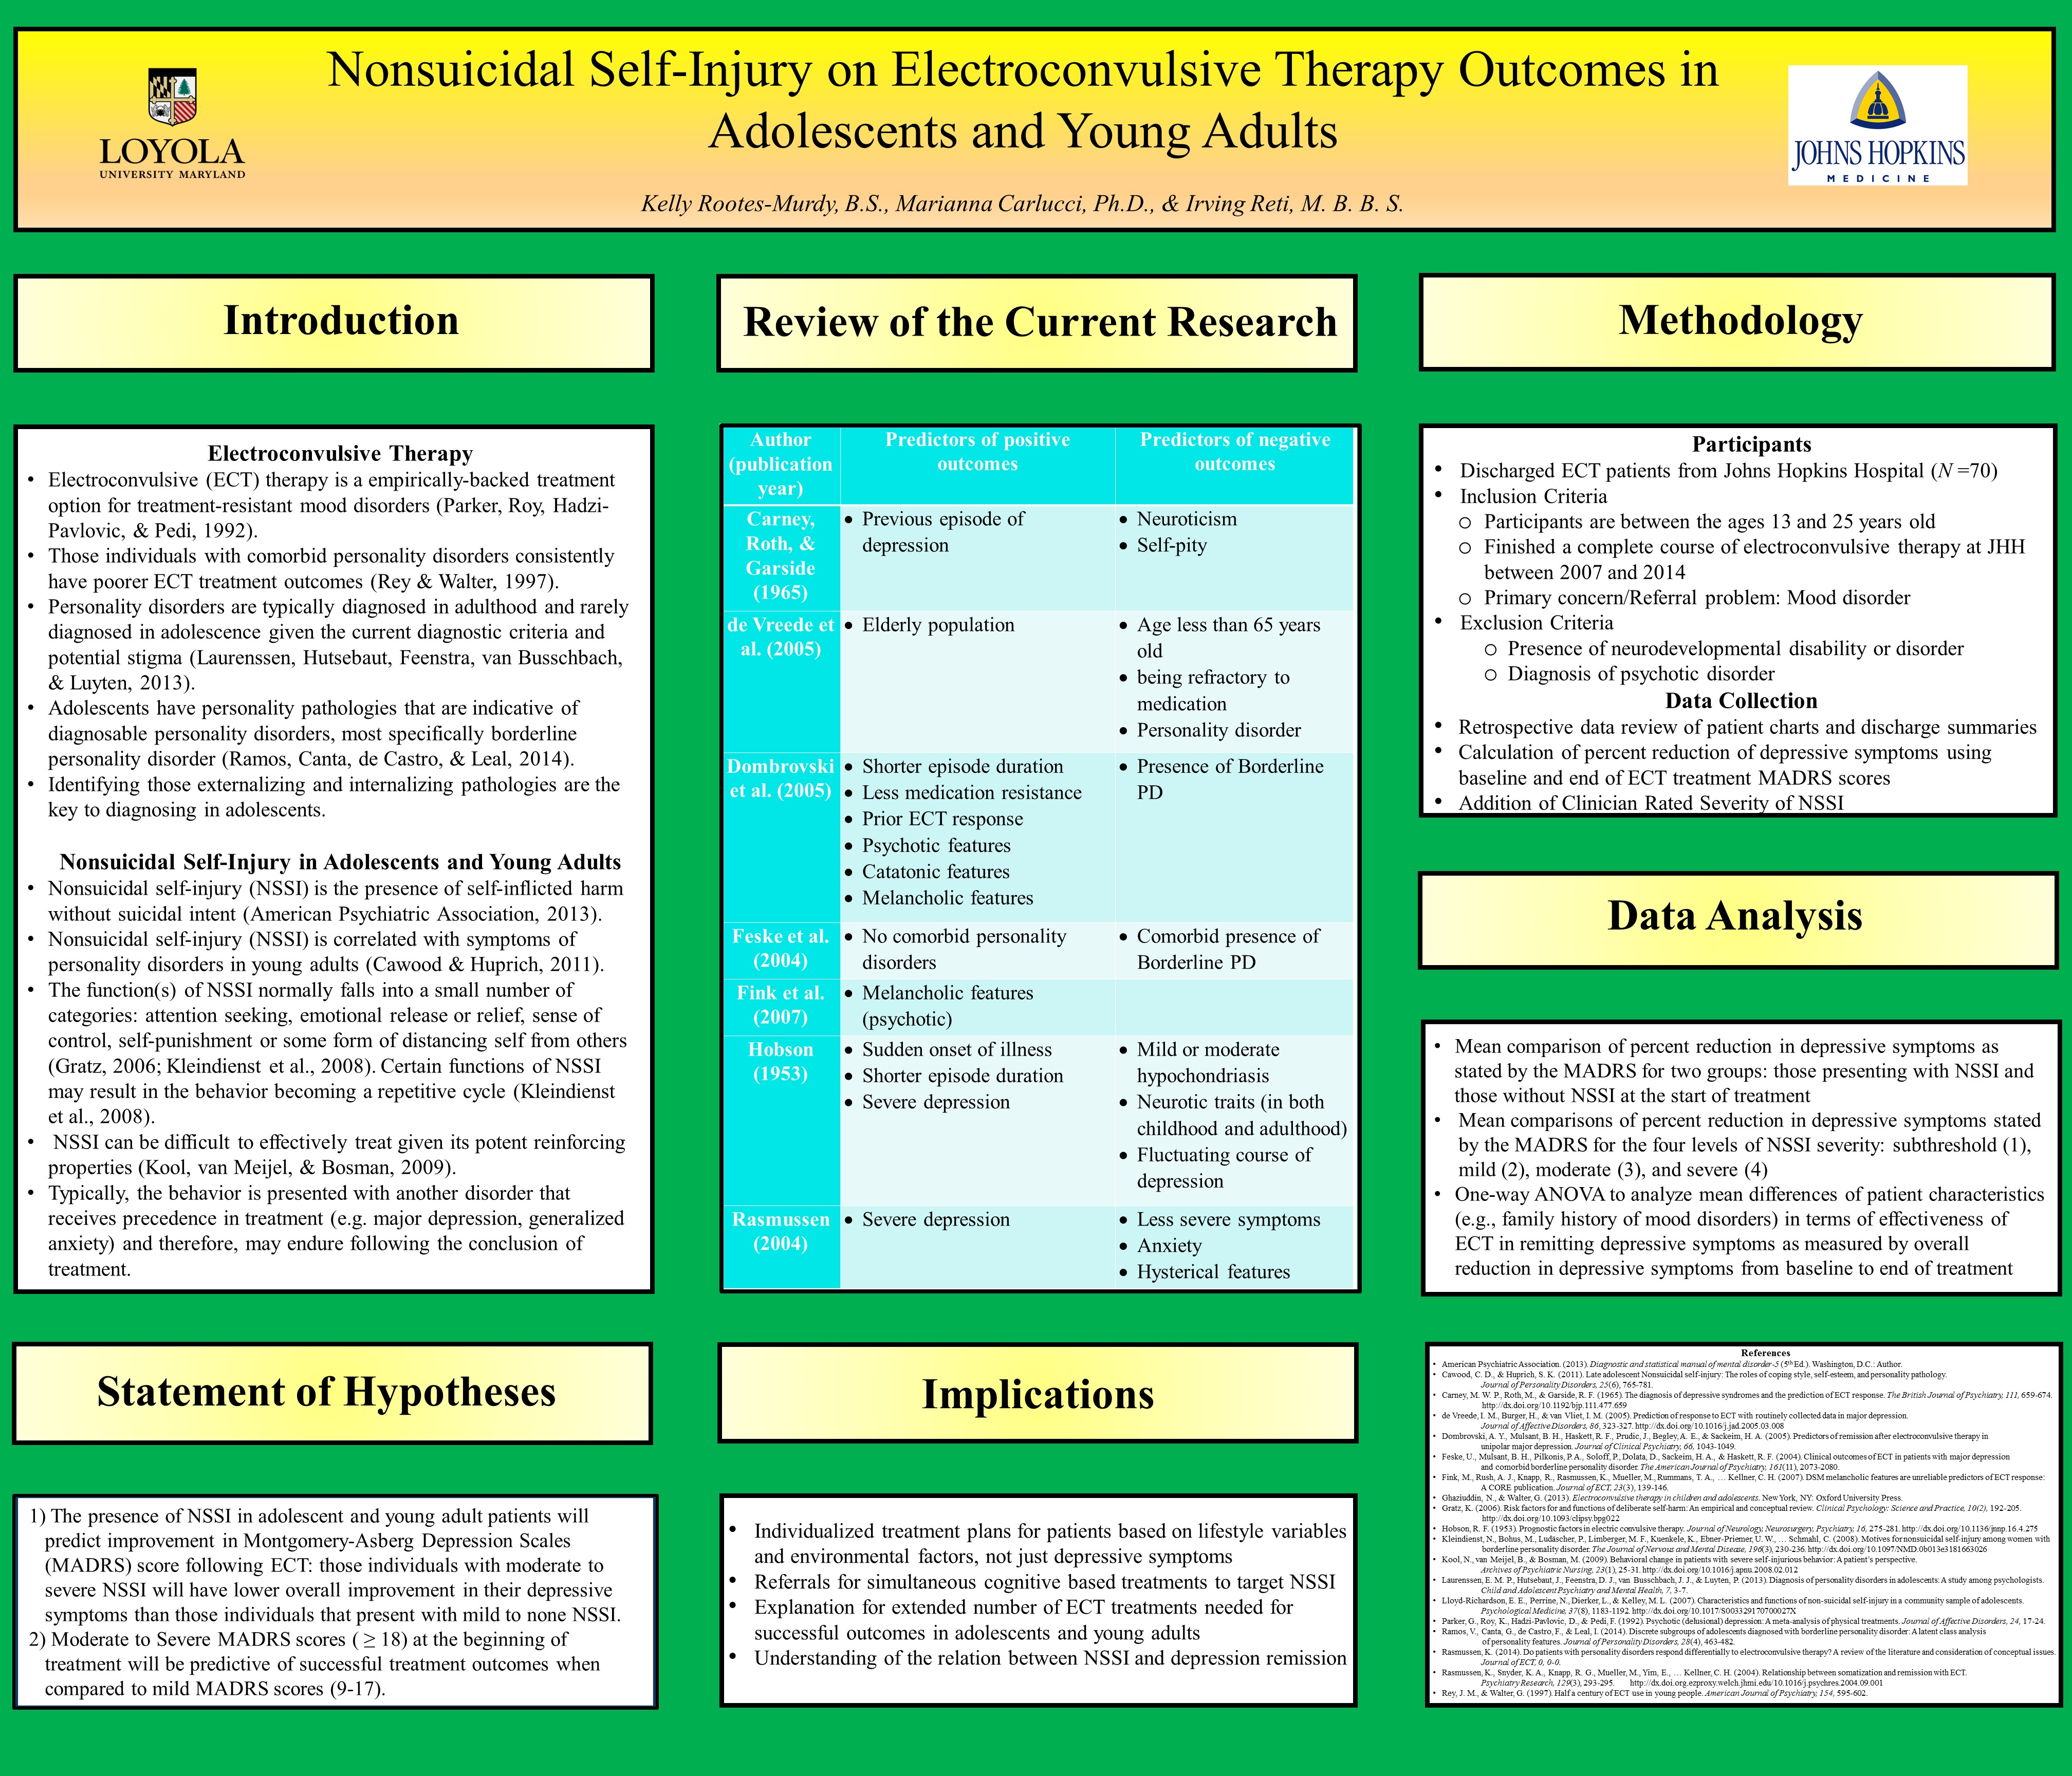 poster image: Nonsuicidal Self-Injury on Electroconvulsive Therapy Outcomes in Adolescents and Young Adults